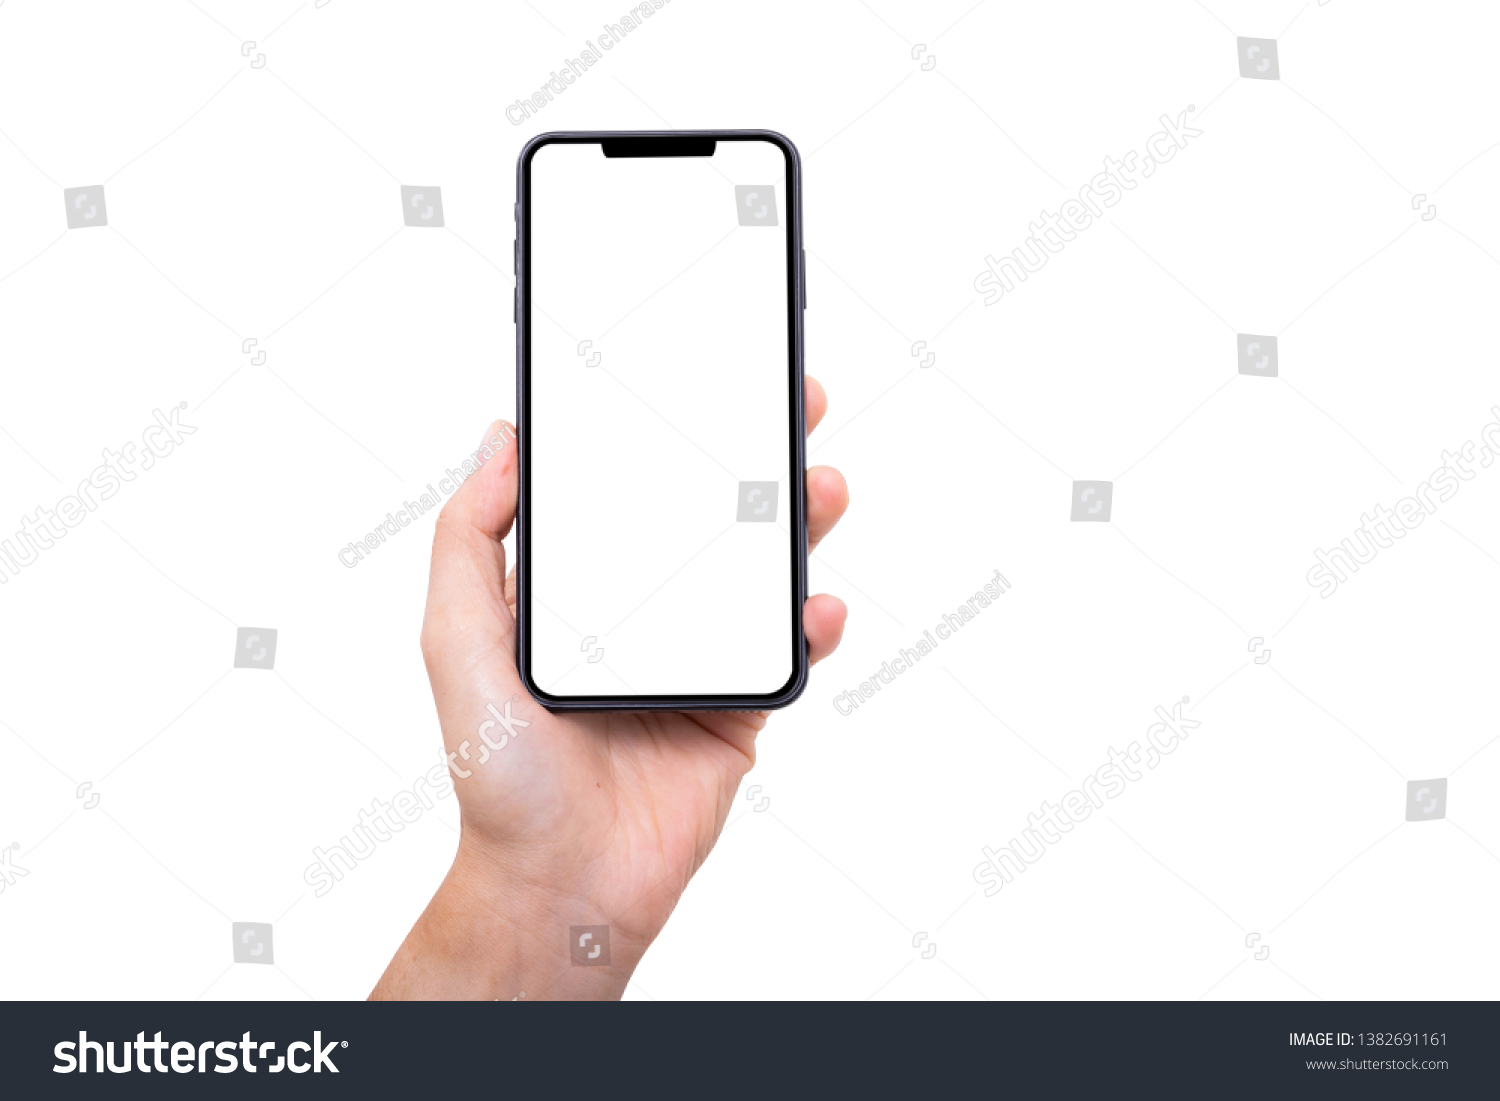 Hand holding new smartphone on white background #1382691161